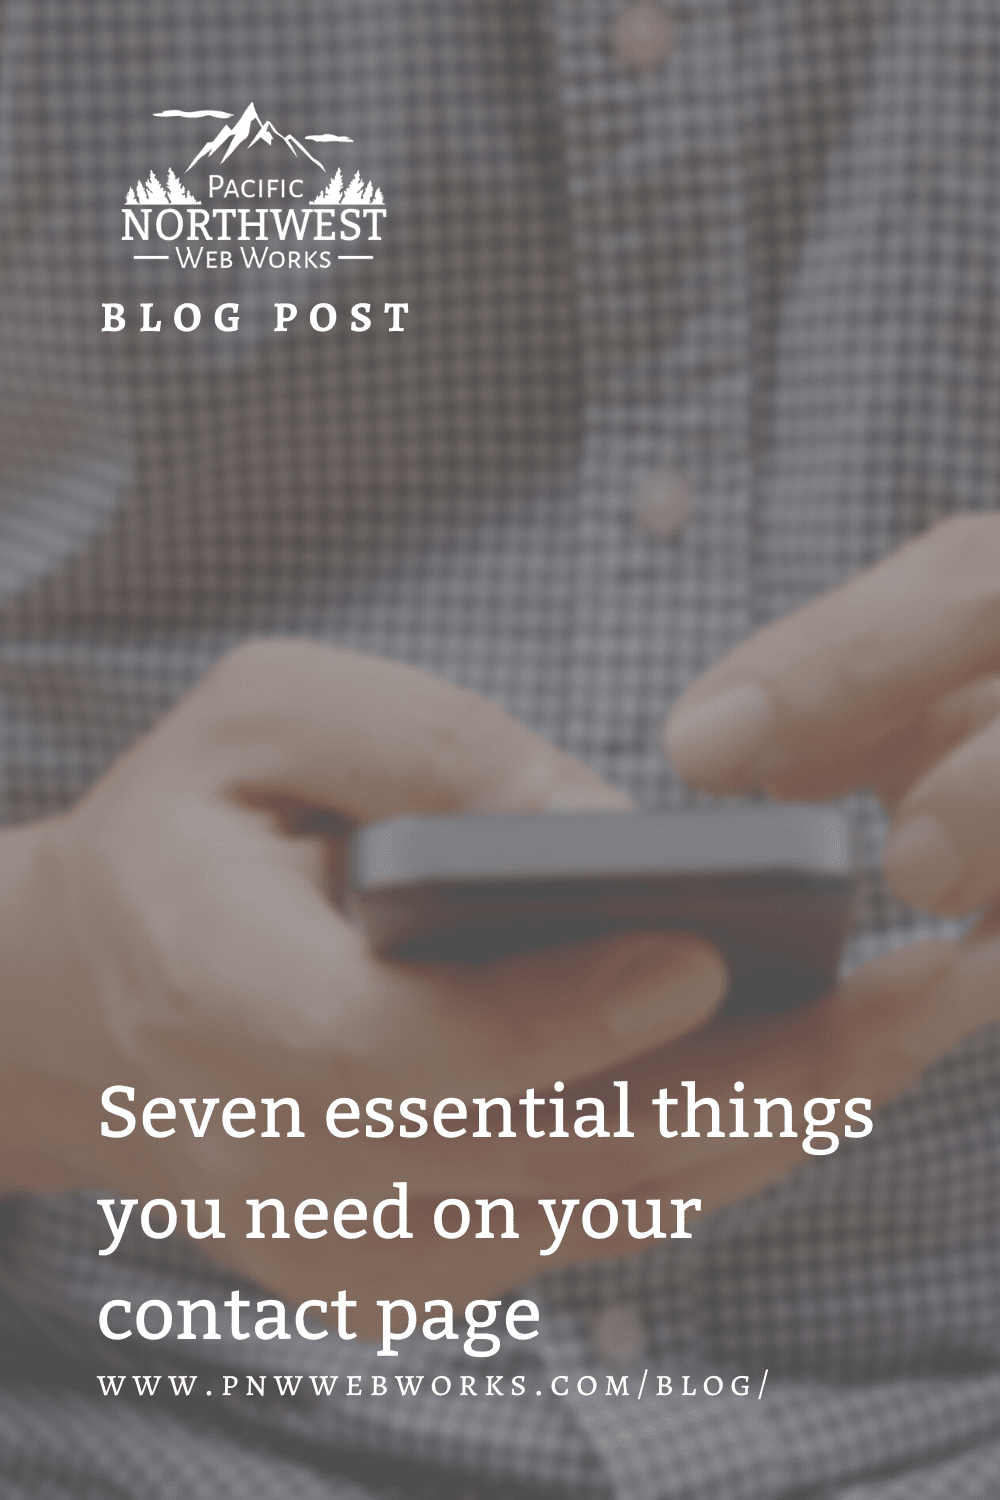 Seven essential things you need on your contact page